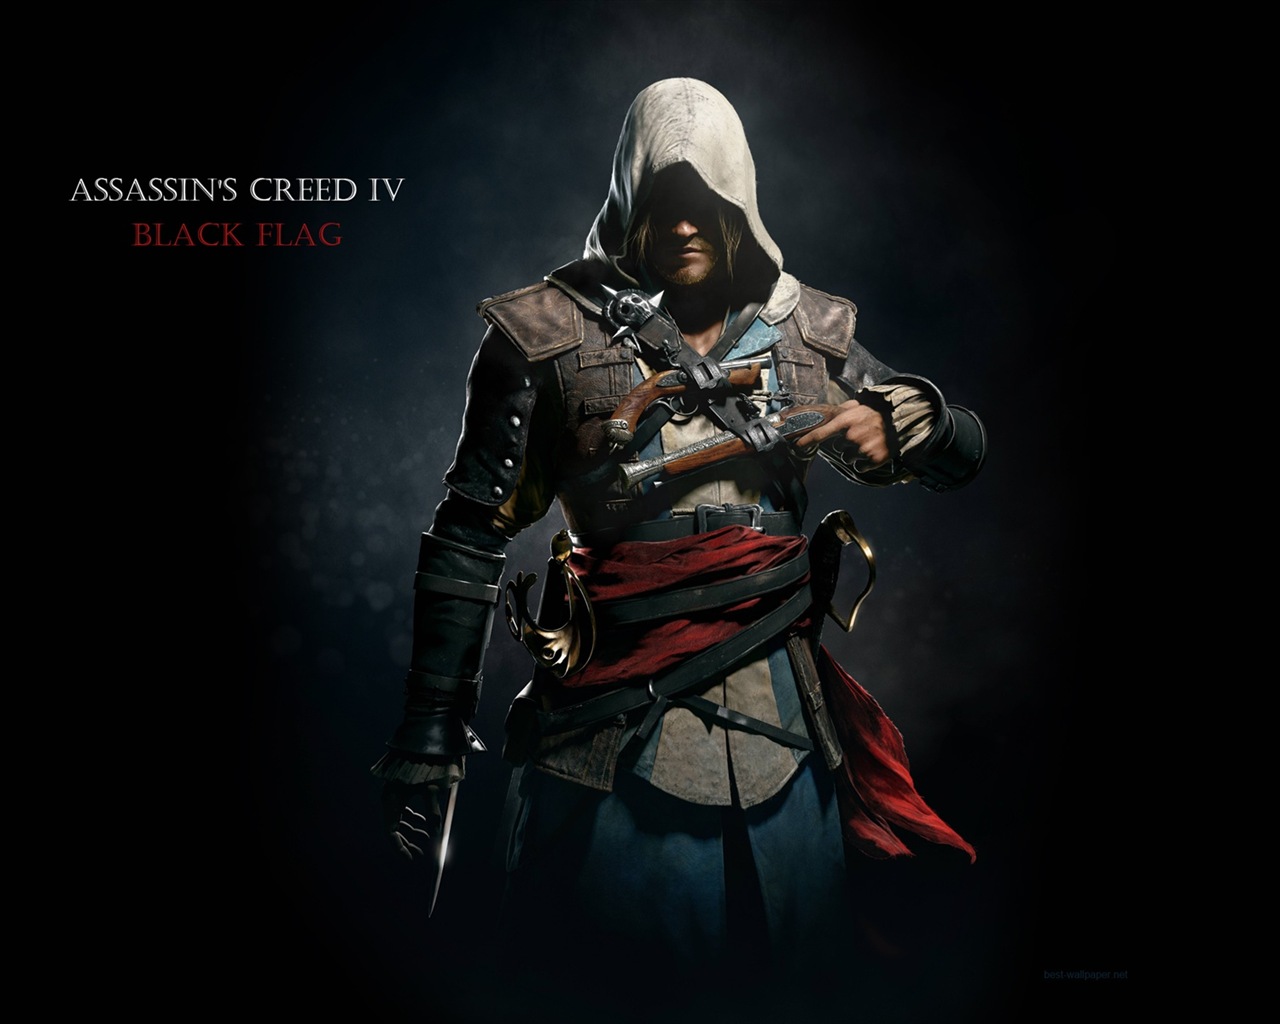 Creed IV Assassin: Black Flag HD wallpapers #9 - 1280x1024